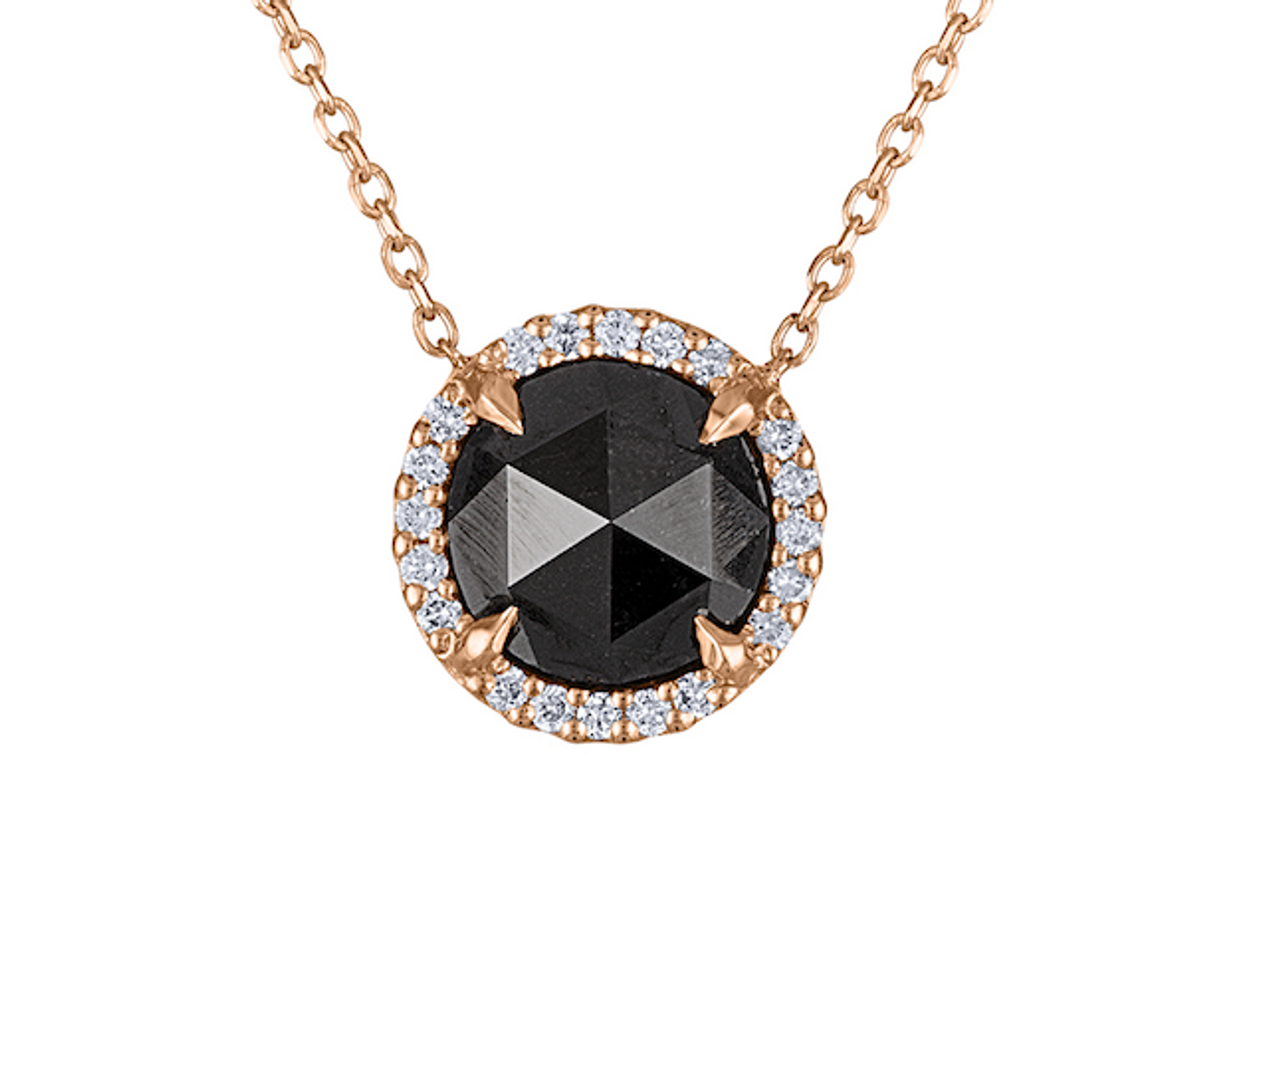 Hand Crafted Rose Cut Black Diamond Necklace